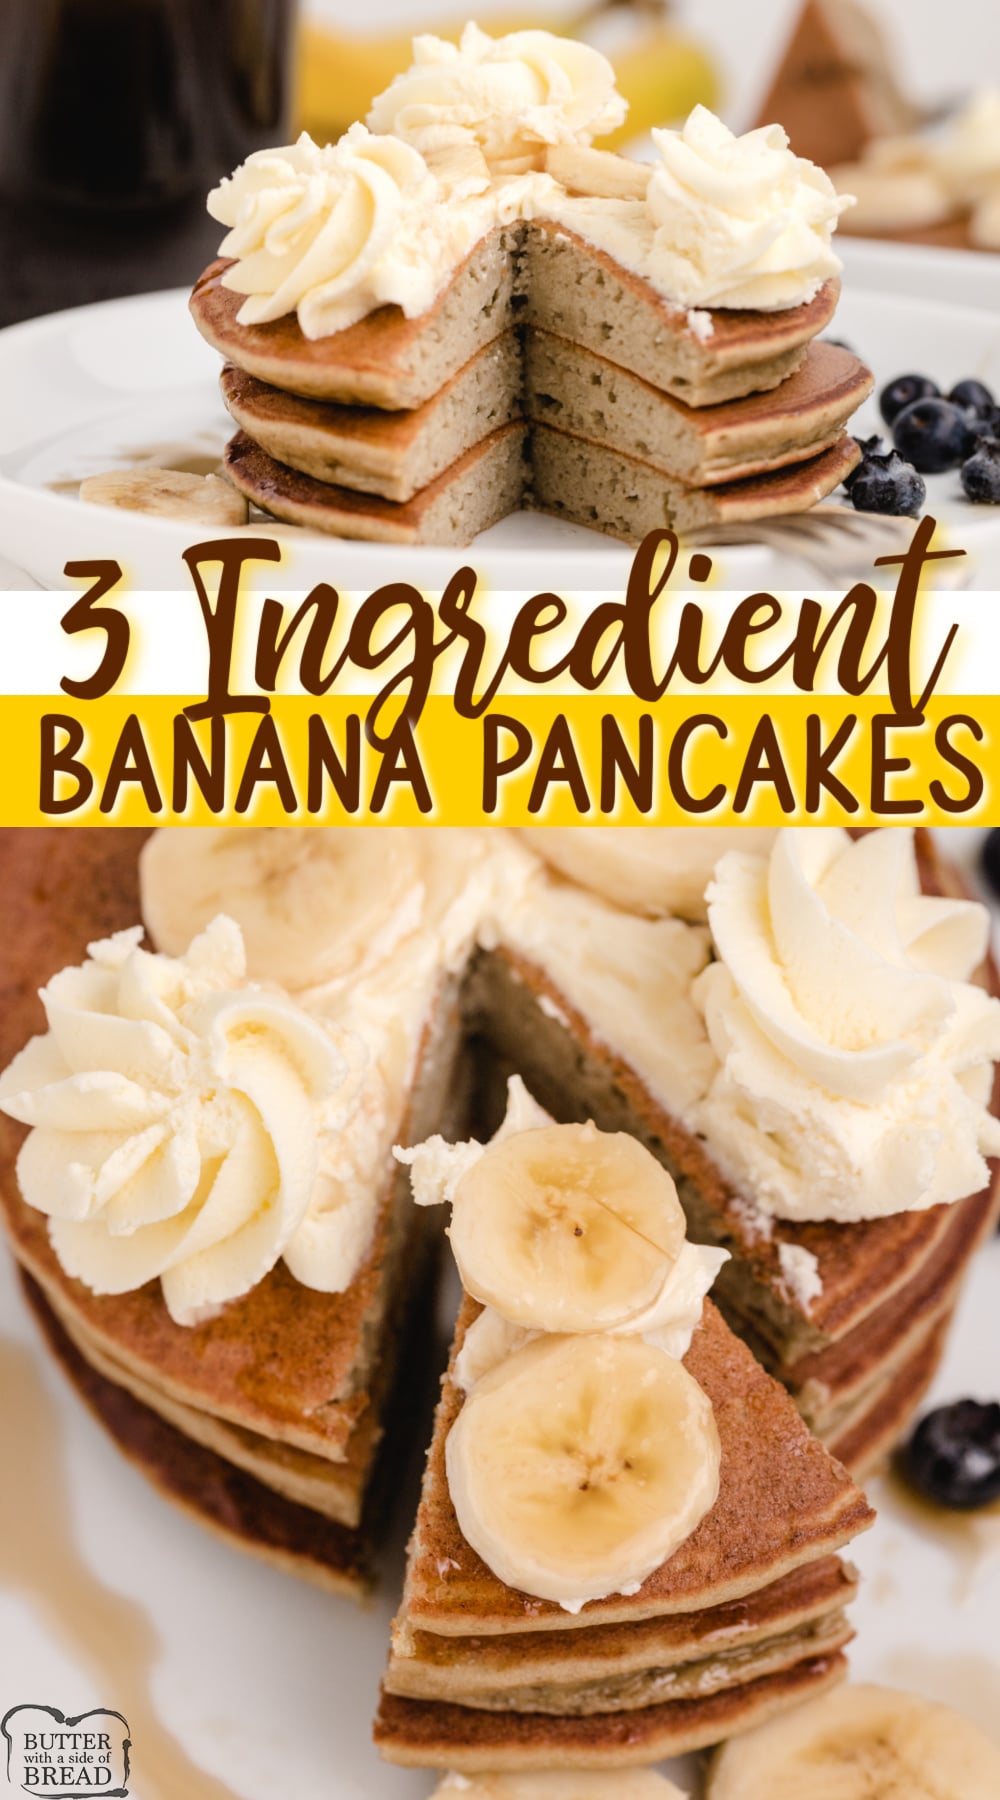 3 Ingredient Banana Pancakes made with bananas, eggs and self-rising flour. Delicious easy pancake recipe that is ready in minutes! 